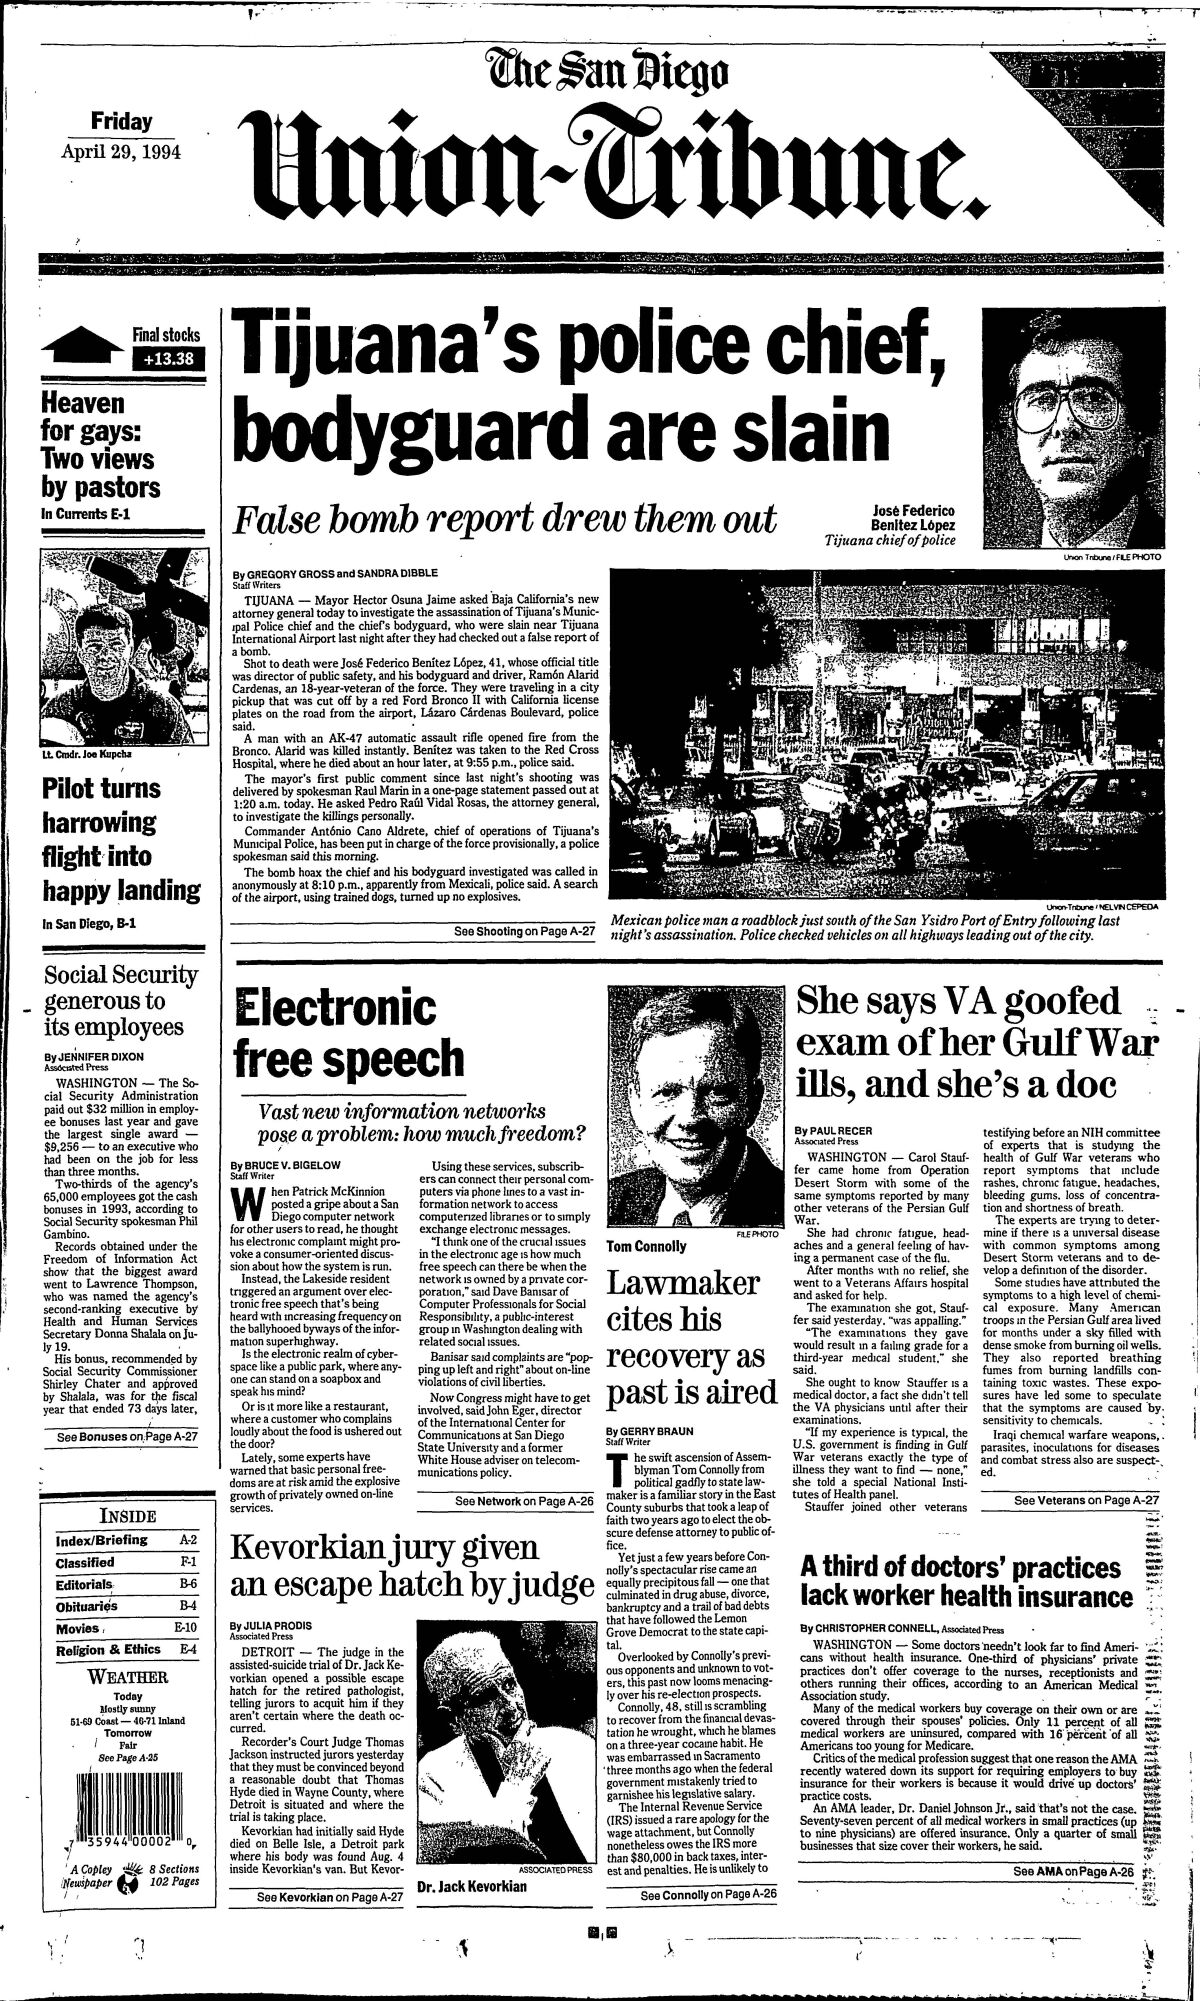 Front page news from The San Diego Union-Tribune, April 29, 1994" "Tijuana's police chief, bodyguard are slain."